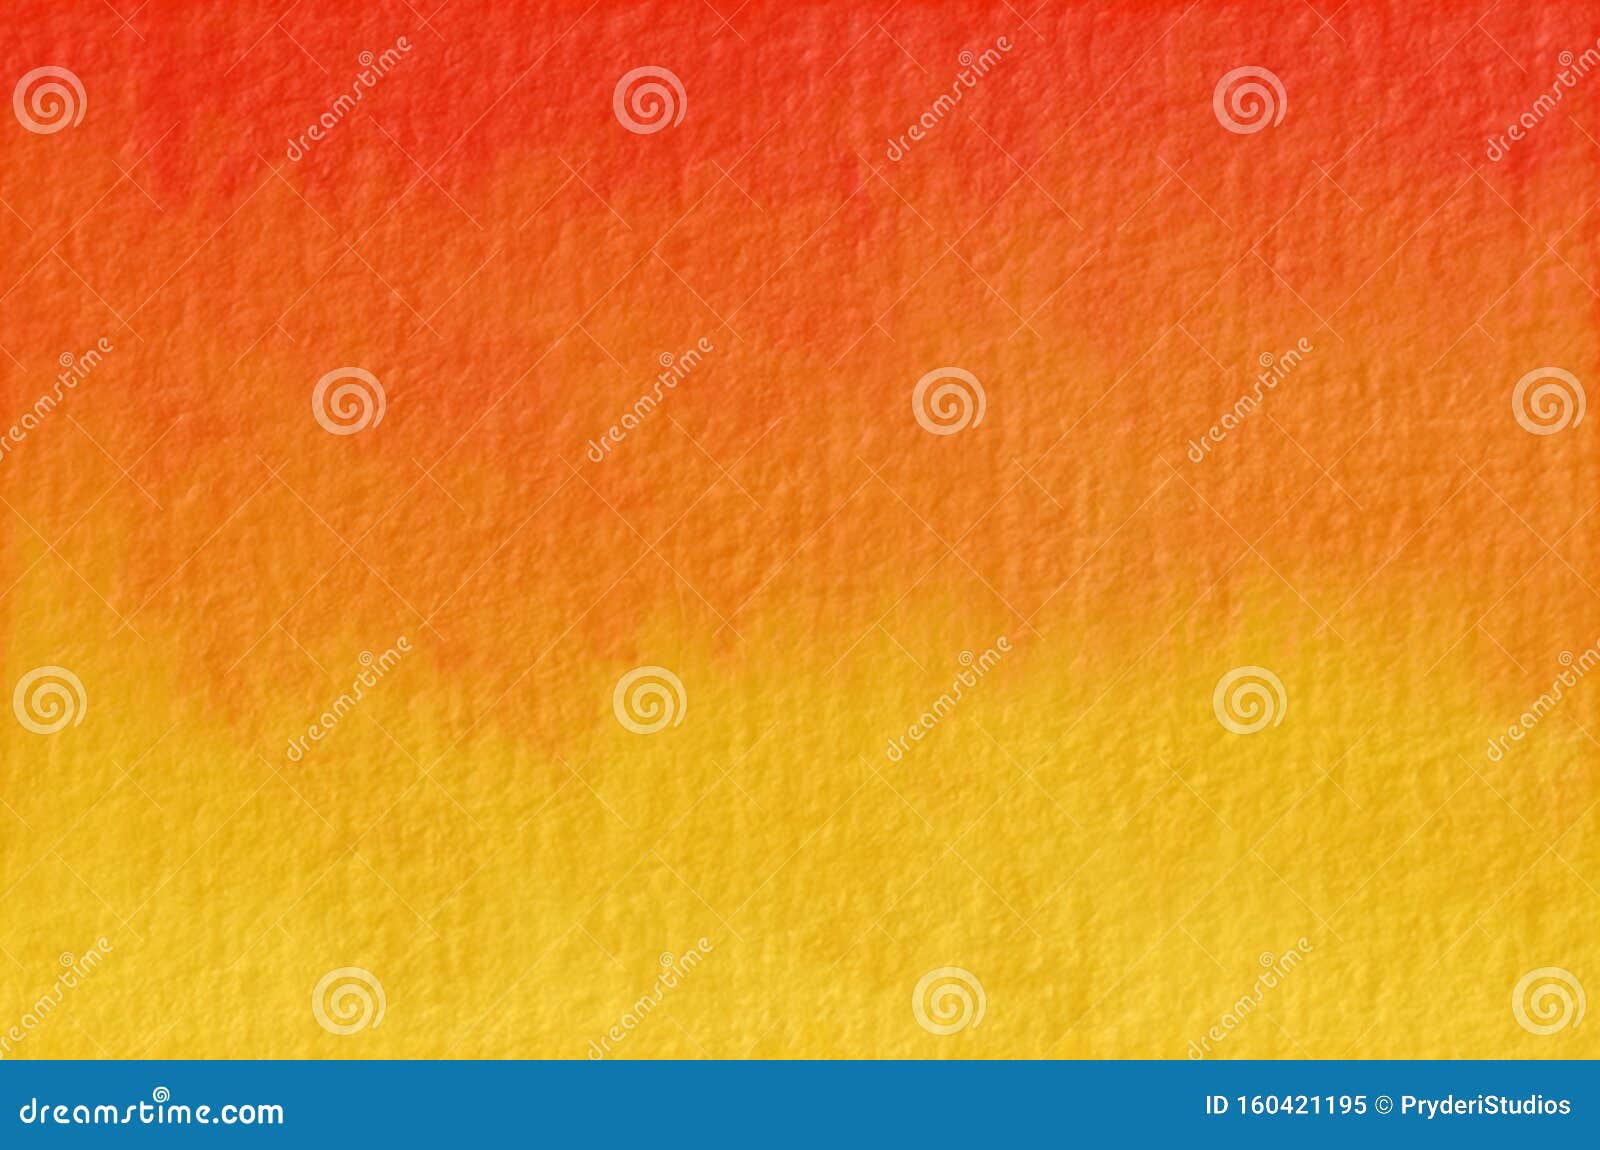 Orange Yellow Ombre Watercolor Background With Paper Texture Stock